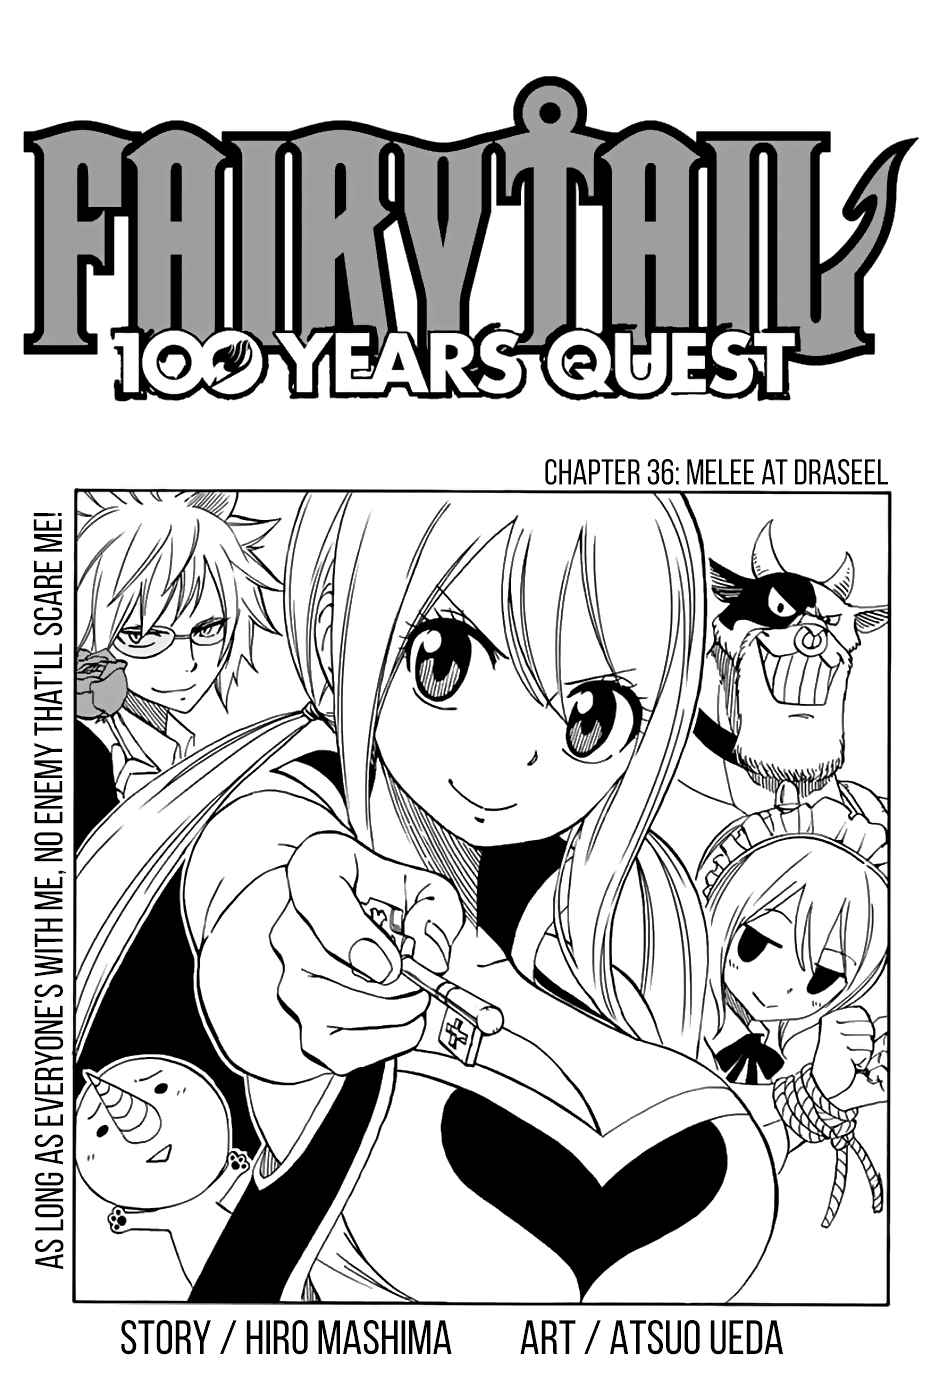 Fairy Tail: 100 Years Quest Ch. 36 Melee at Draseel